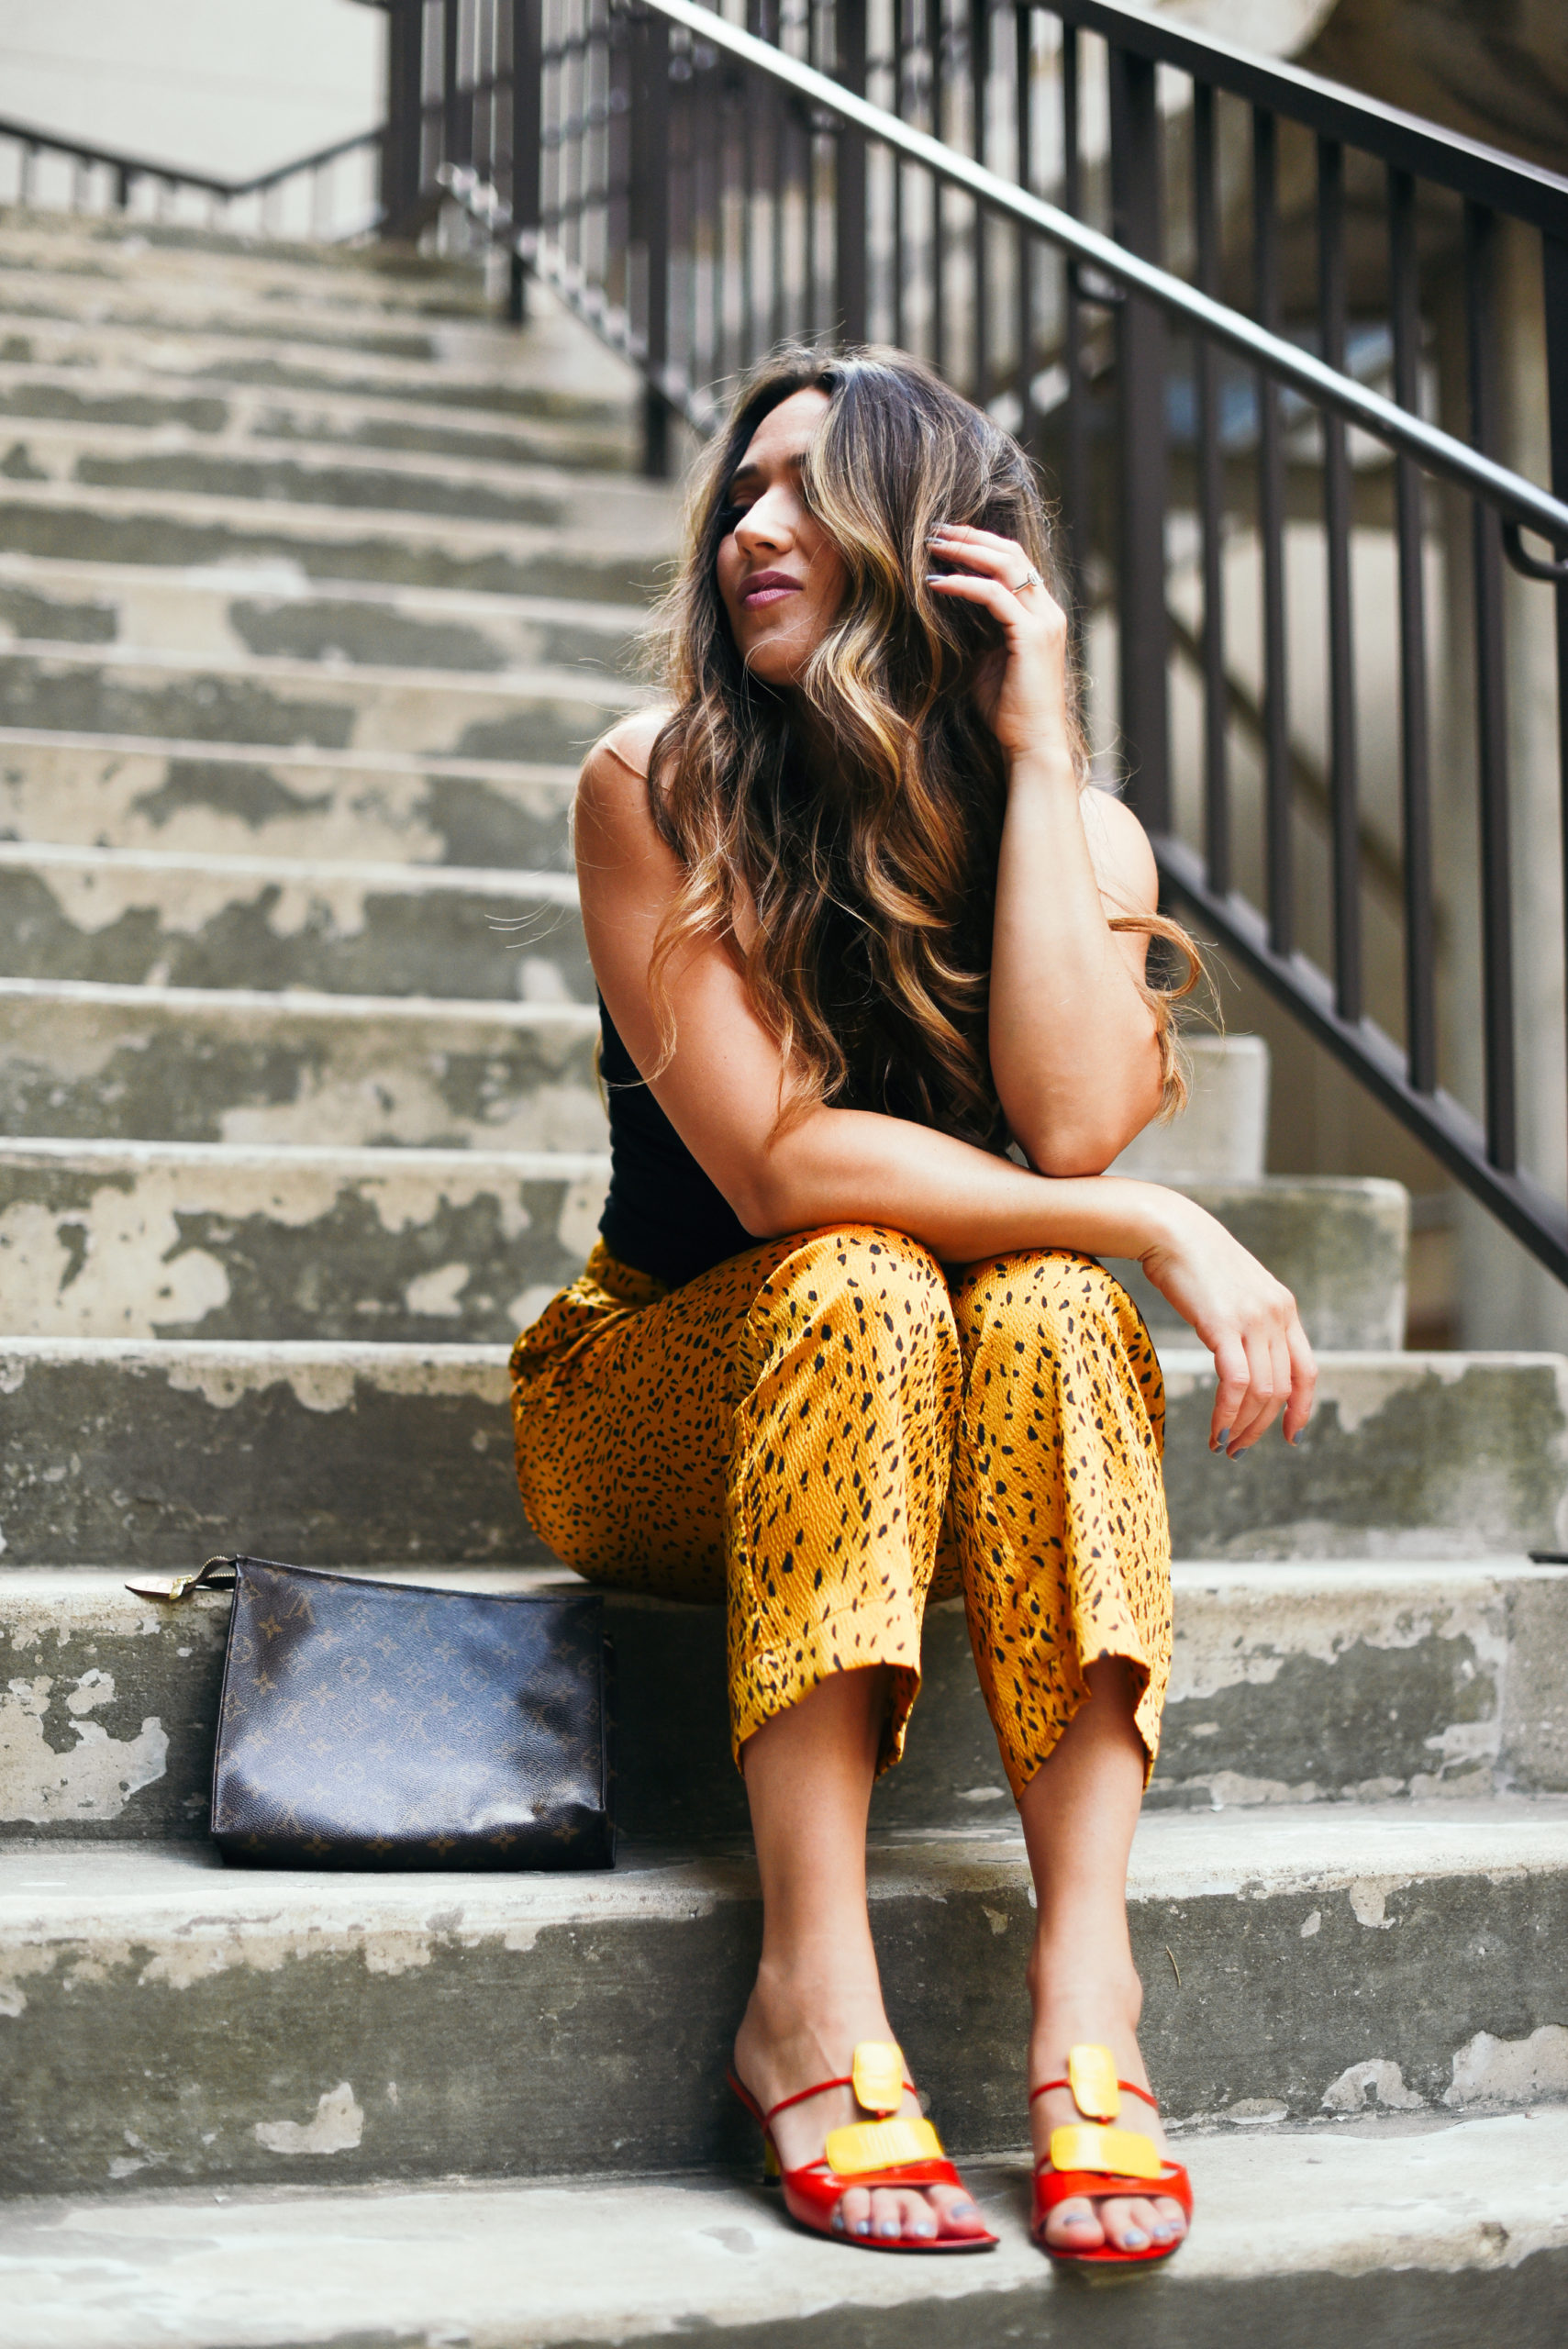 end-of-summer-outfit-silky-cheetah-pants-tube-top-streetstyle-fun-colors-girl-fashion